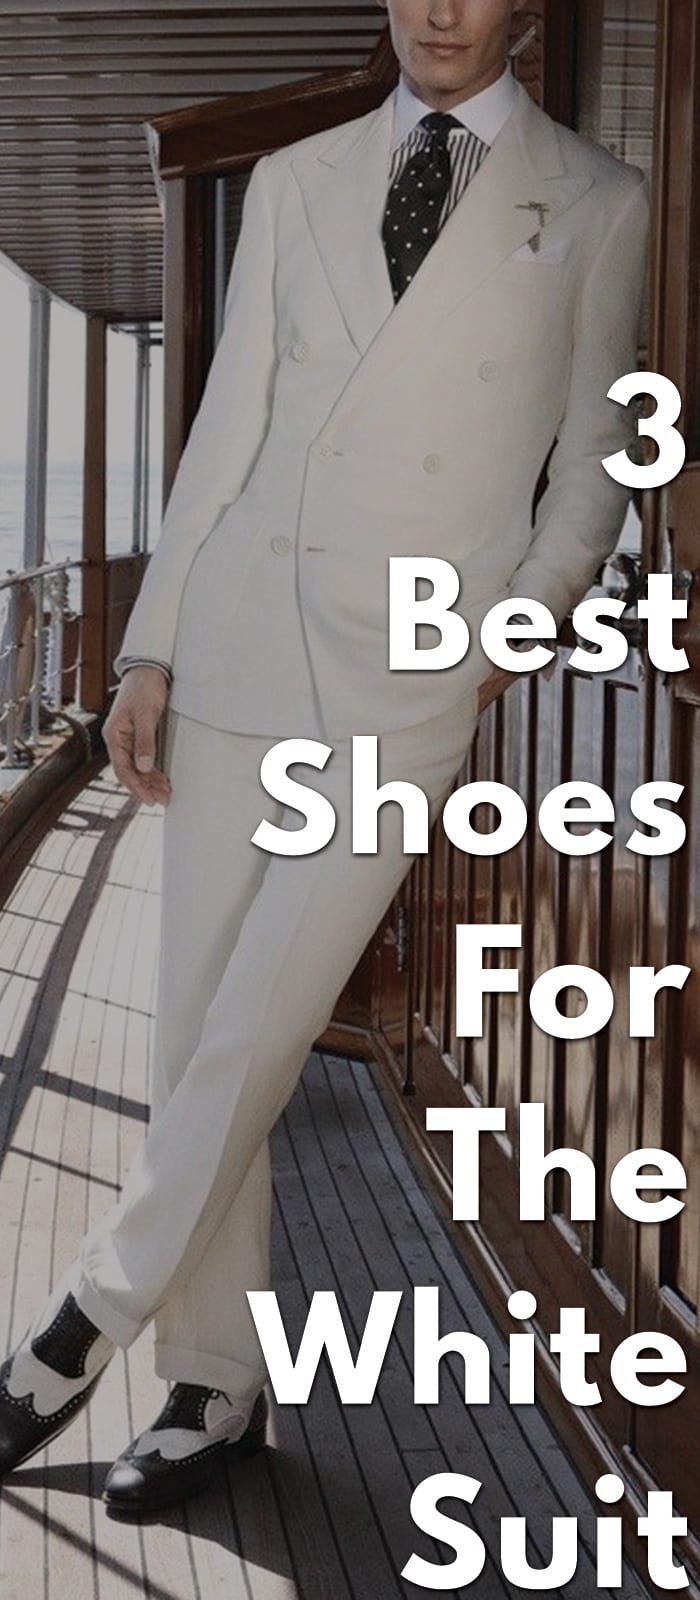 3-Best-Shoes-For-The-White-Suit